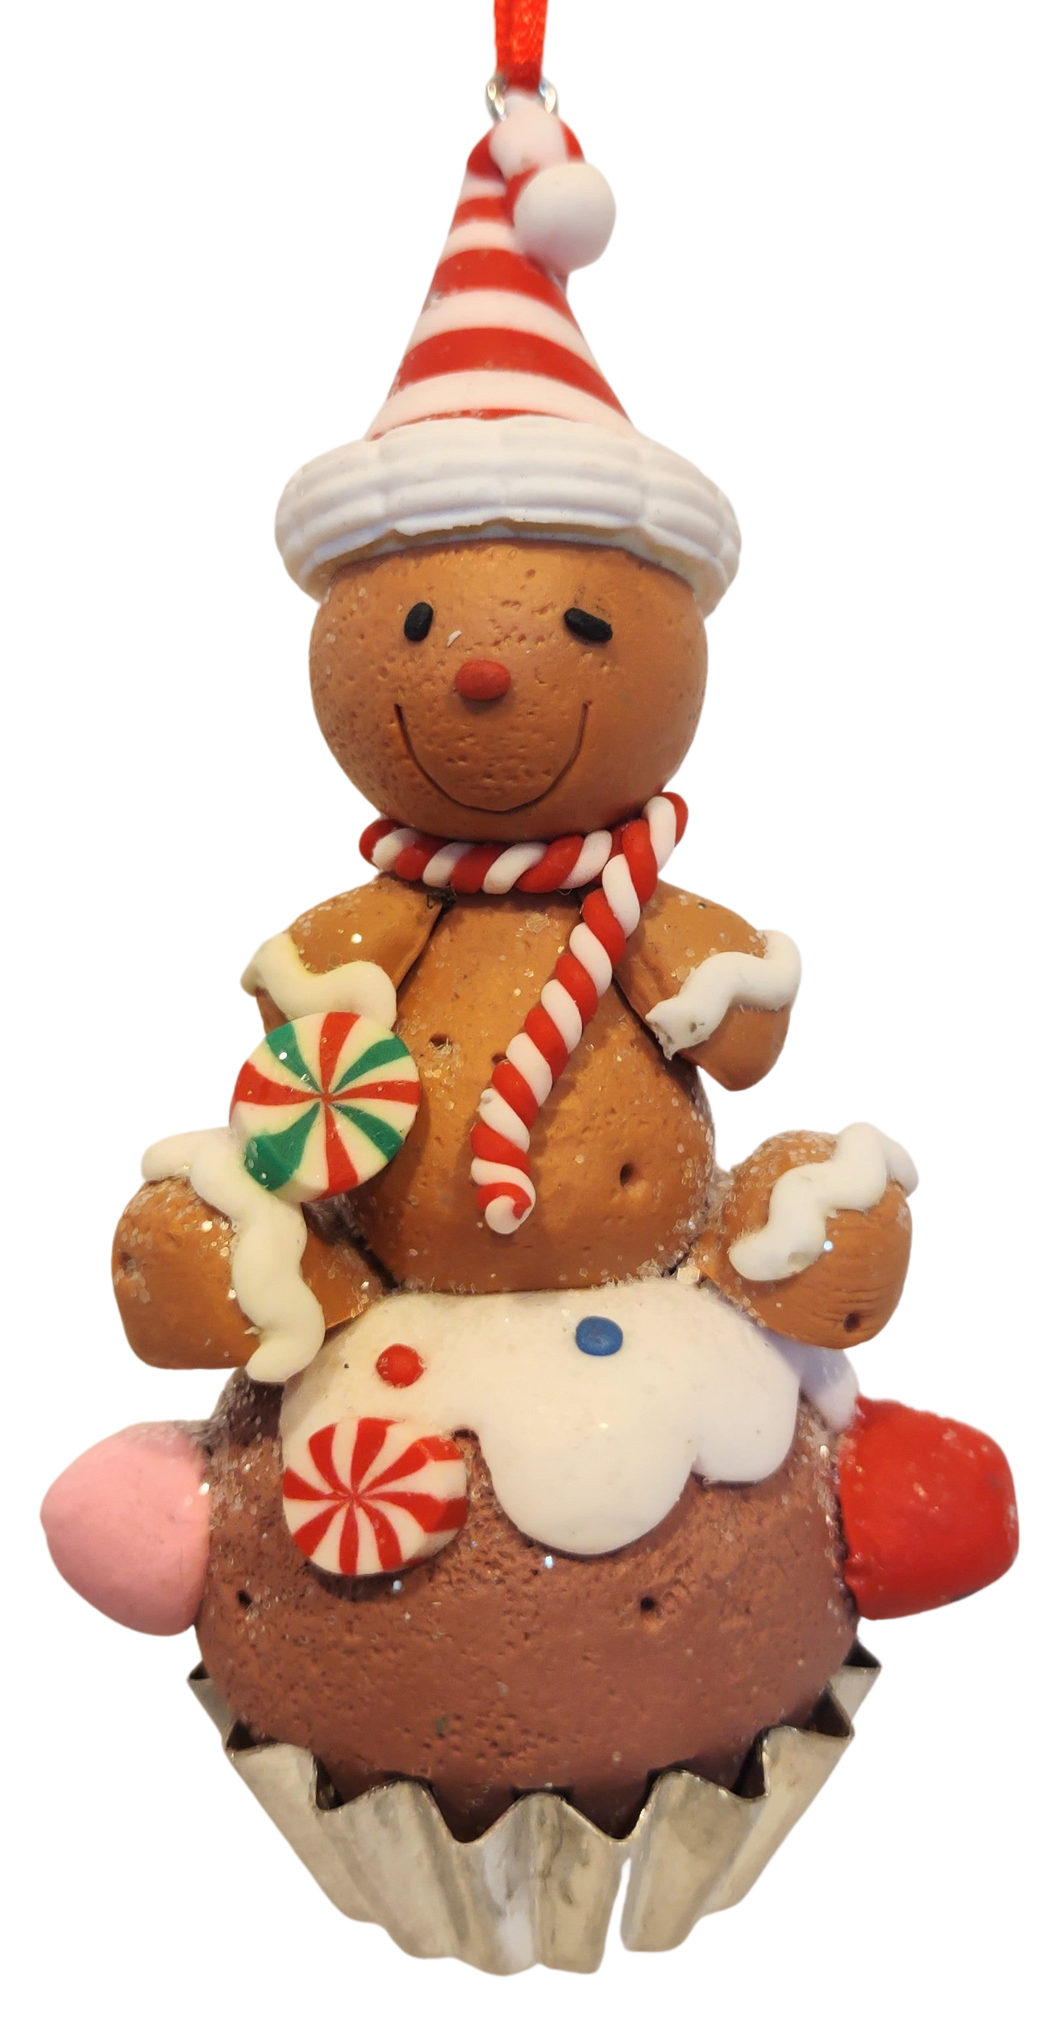 Clay dough Gingerbread Man Sitting on a Cupcake Ornament 3.5